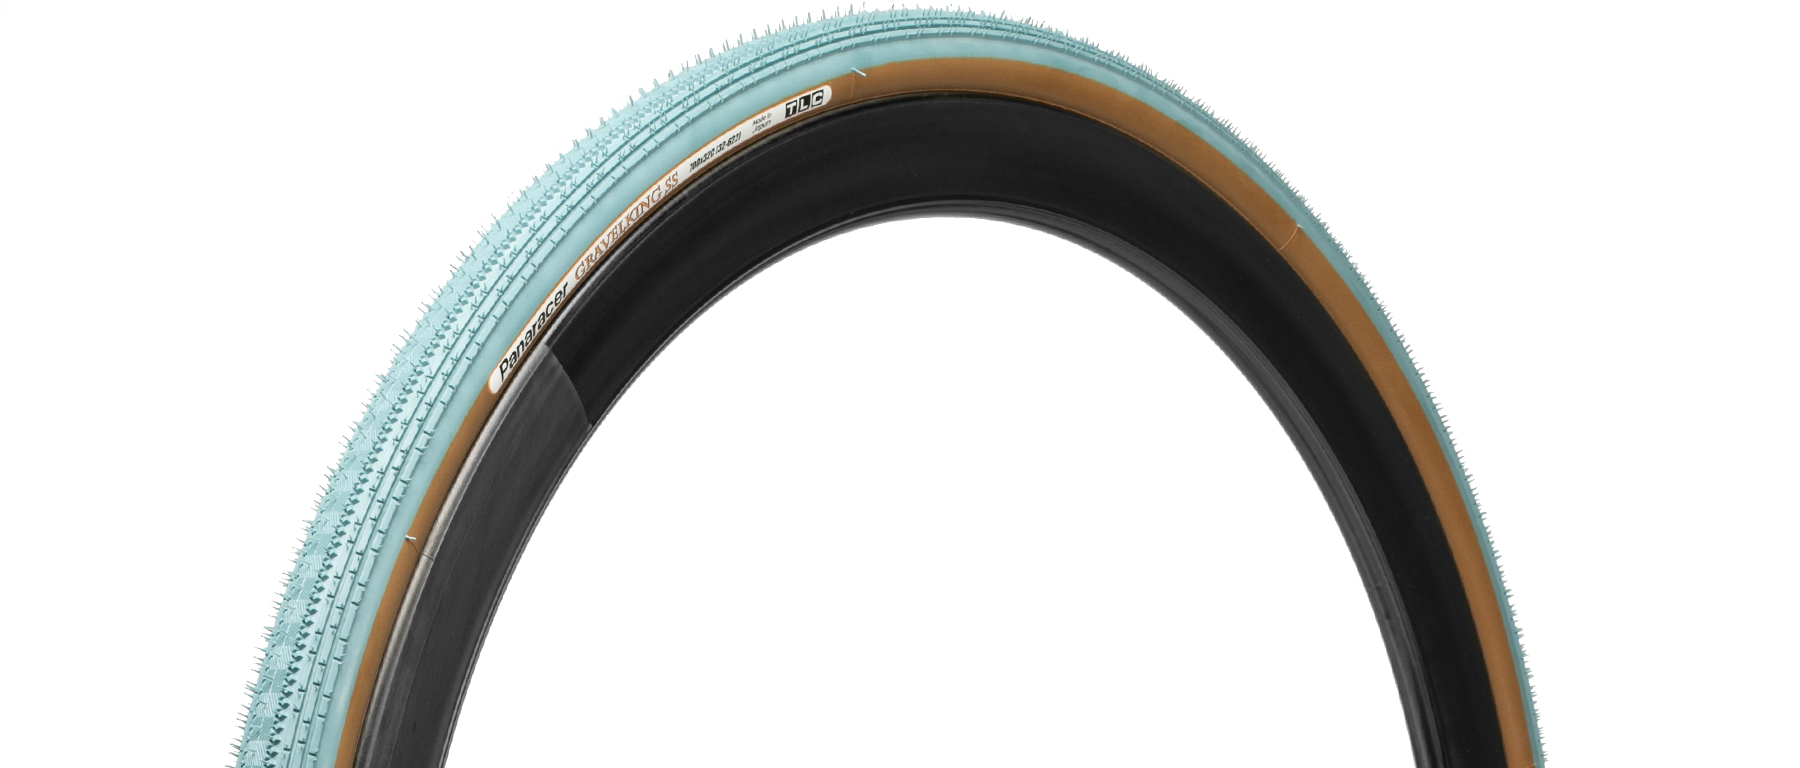 Panaracer GravelKing SS Limited Edition Tubeless Tire